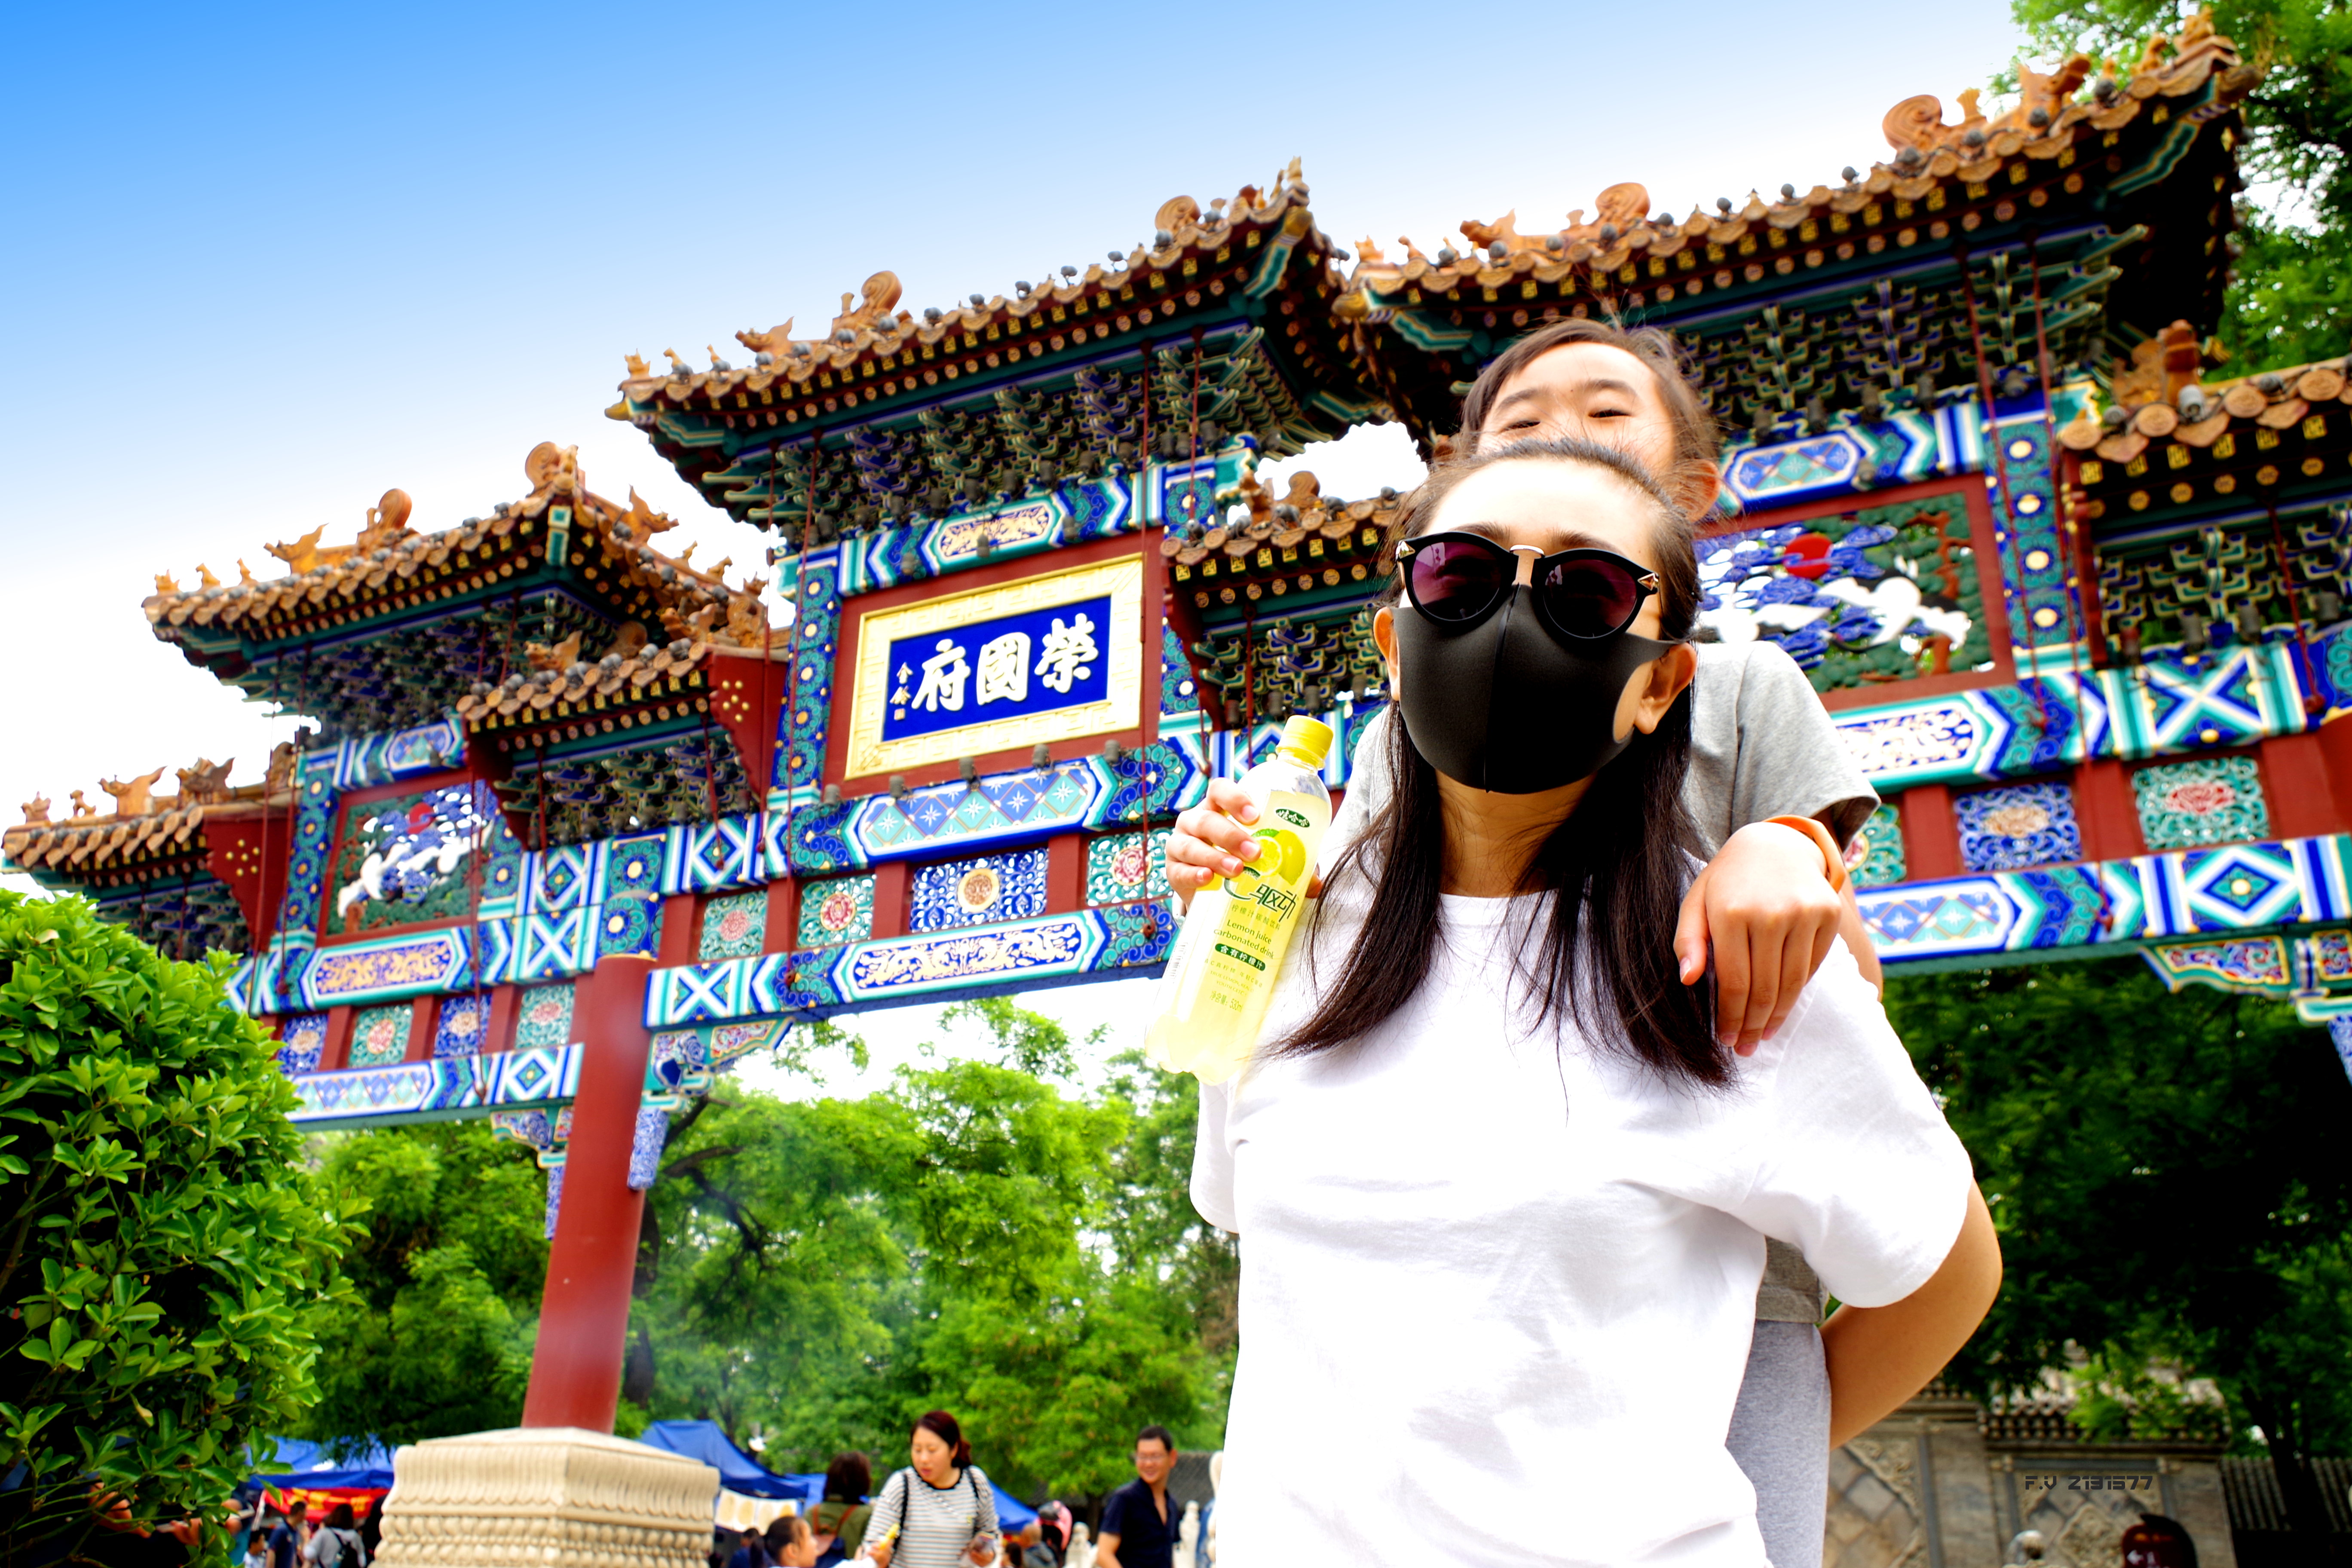 People 5472x3648 China children outdoors women women with shades Asian mask